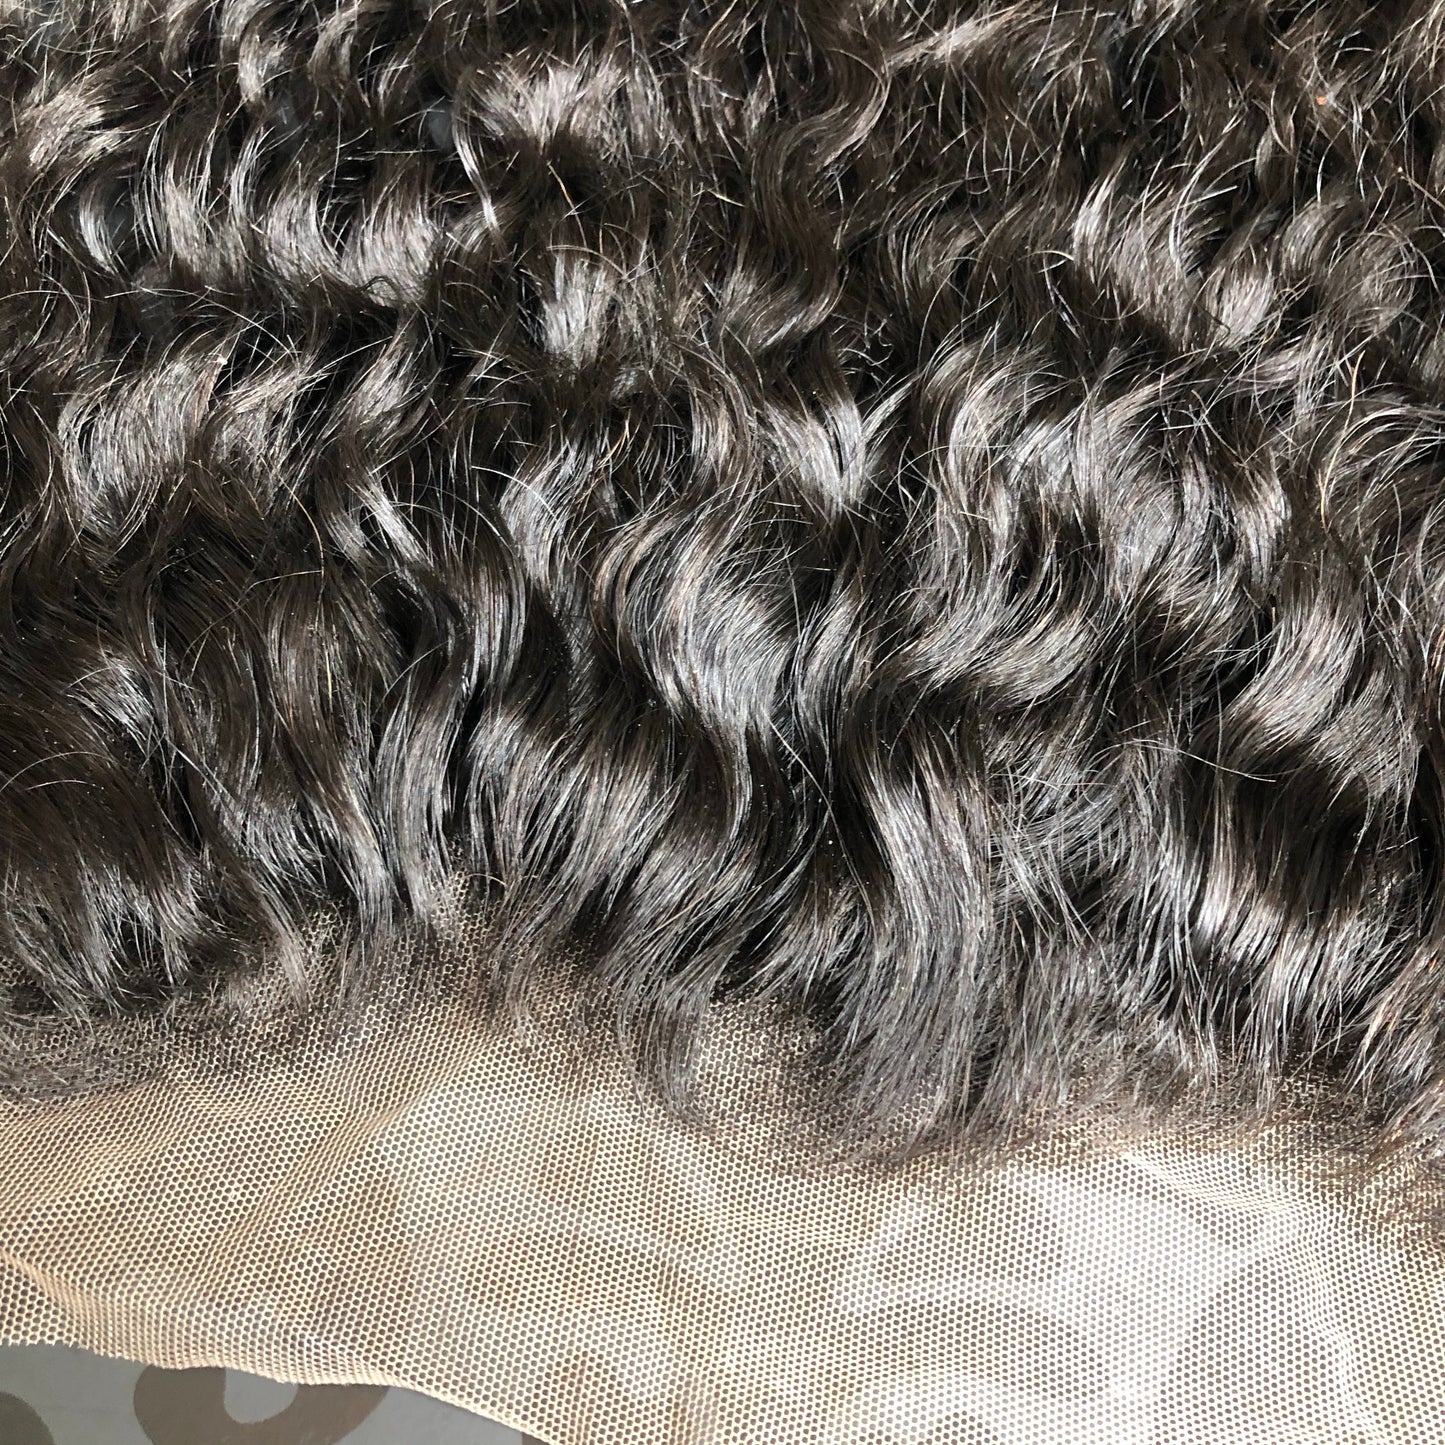 13x4 Transparent Lace Signature Curly 14in Frontal